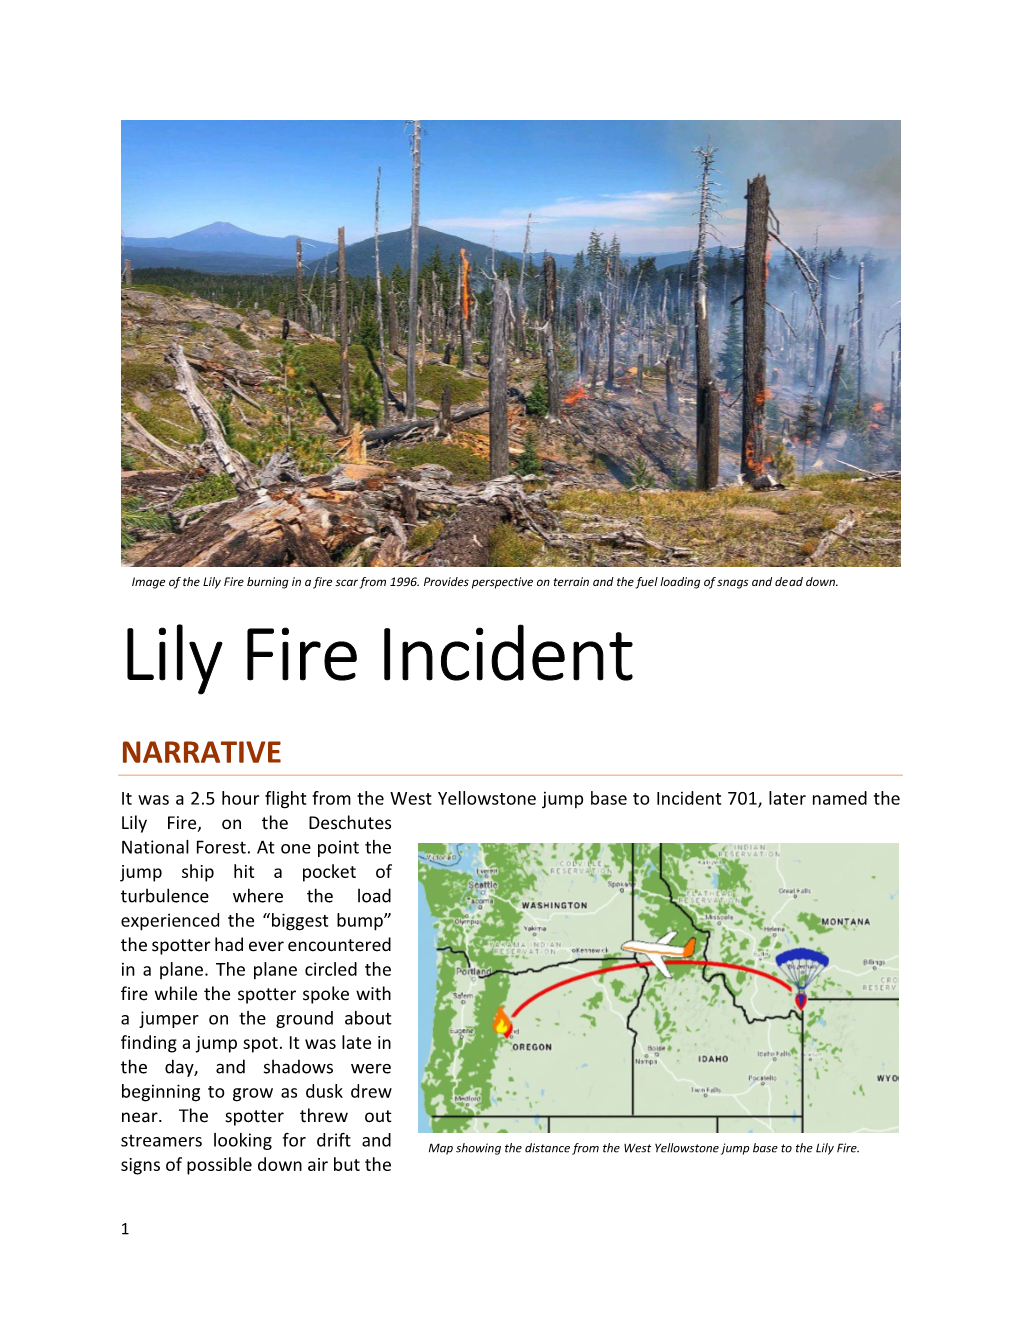 Lily Fire Incident